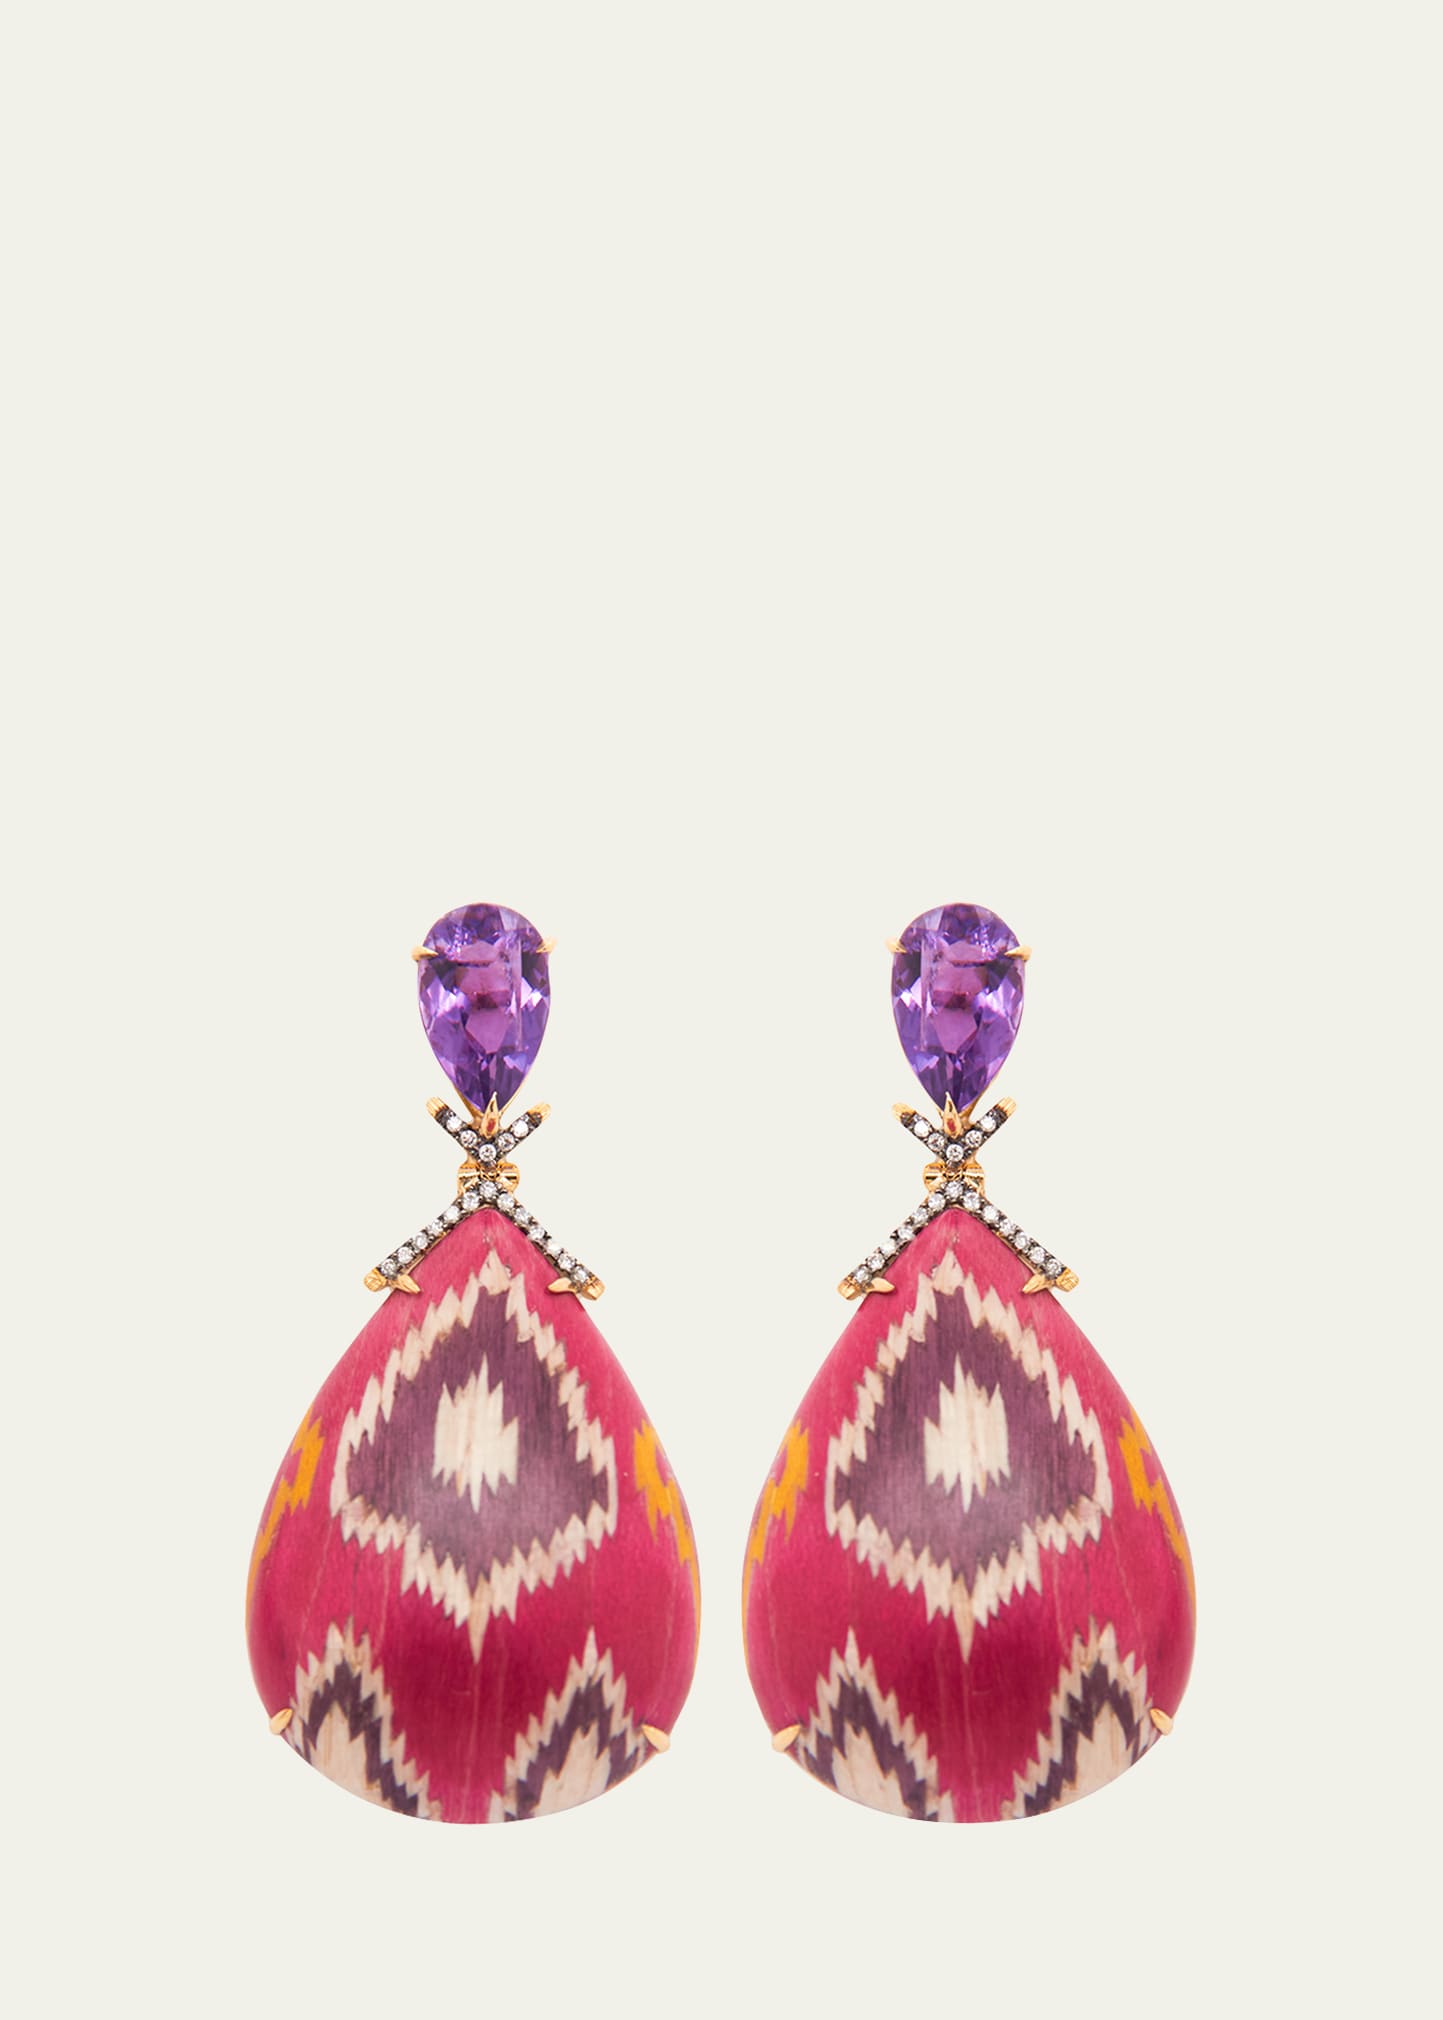 Yellow Gold Drop Earrings with Diamonds and Amethysts